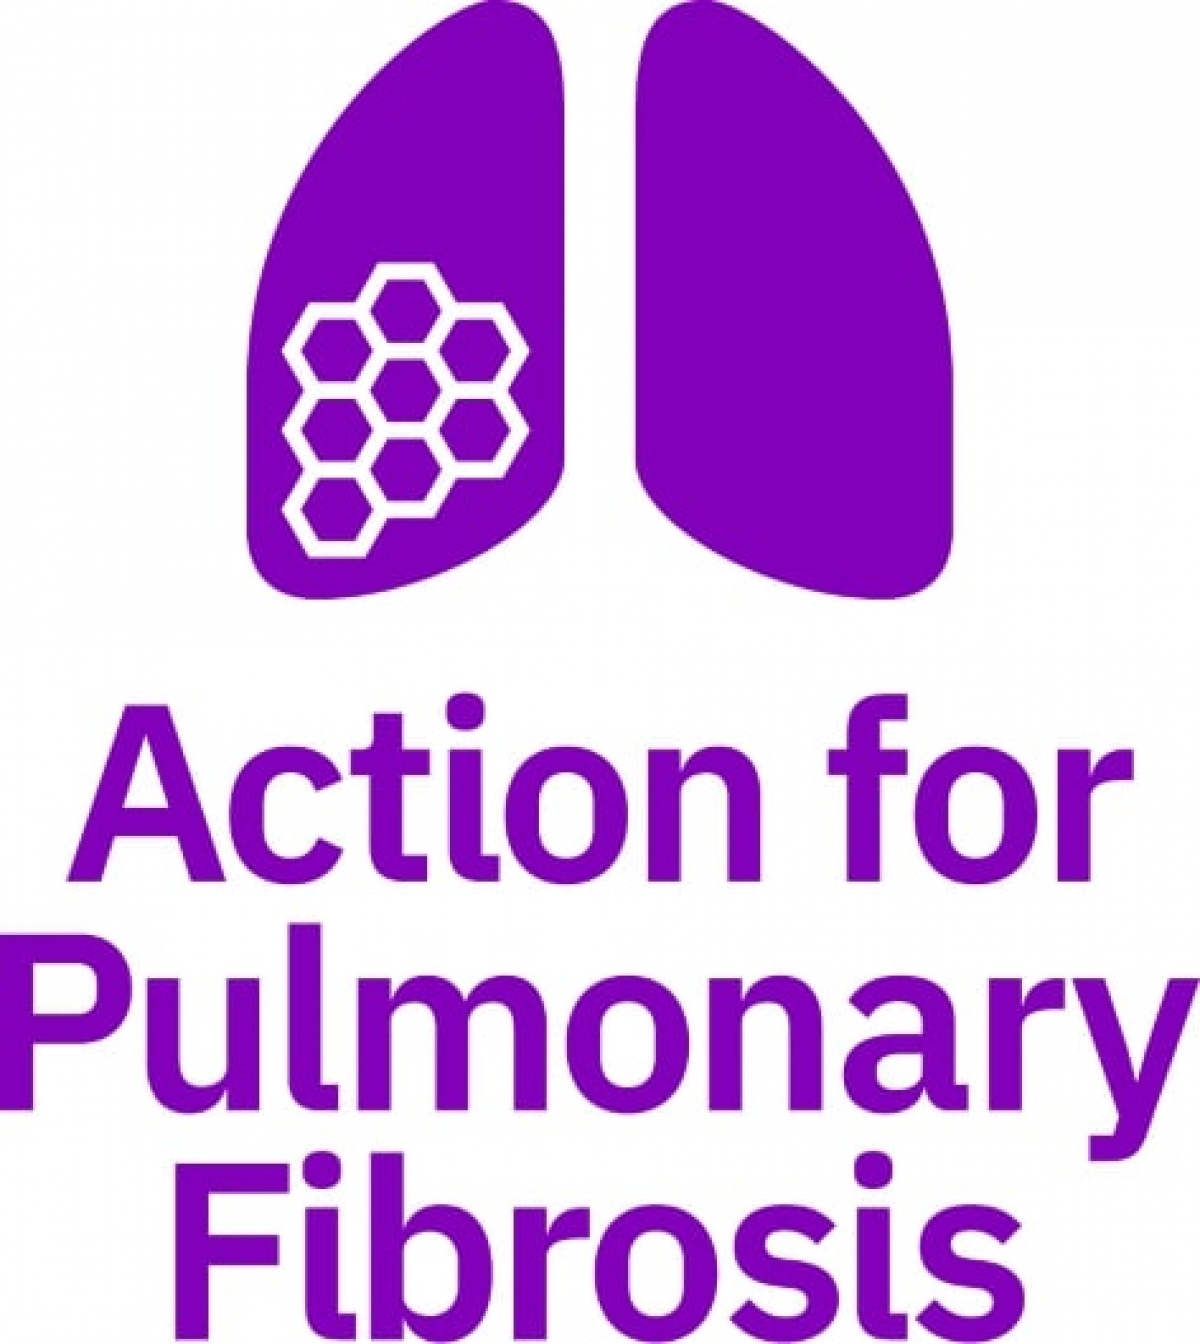 Action for Pulmonary Fibrosis eCards